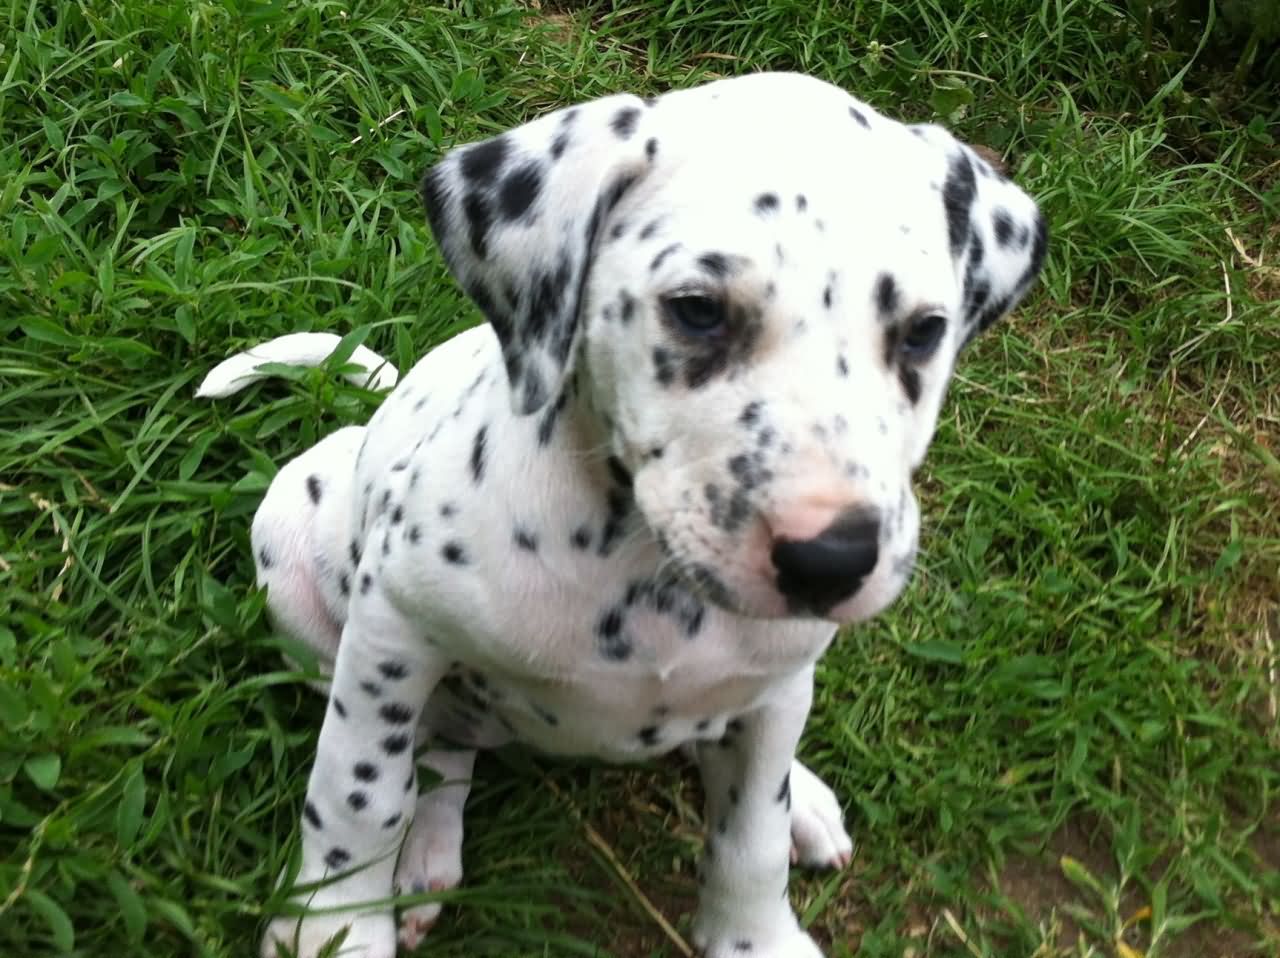 Dalmatian Puppy Sitting On Grass Picture